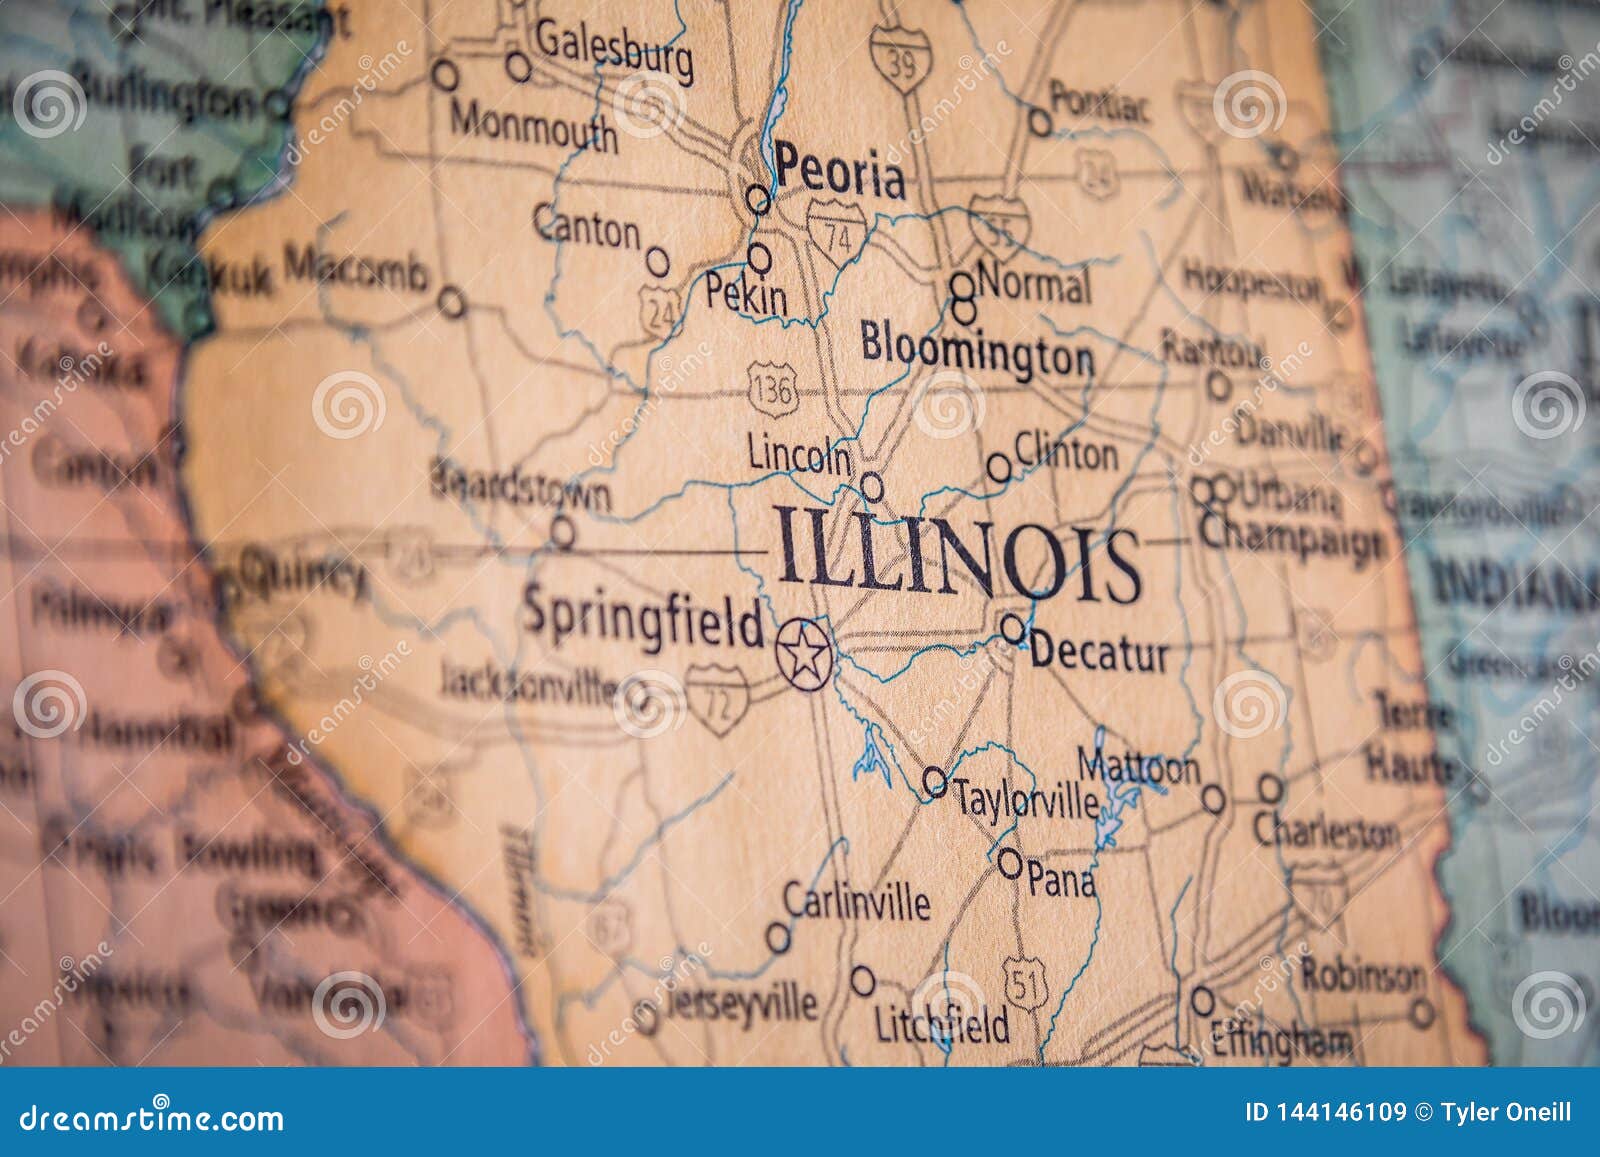 selective focus of illinois state on a geographical and political state map of the usa